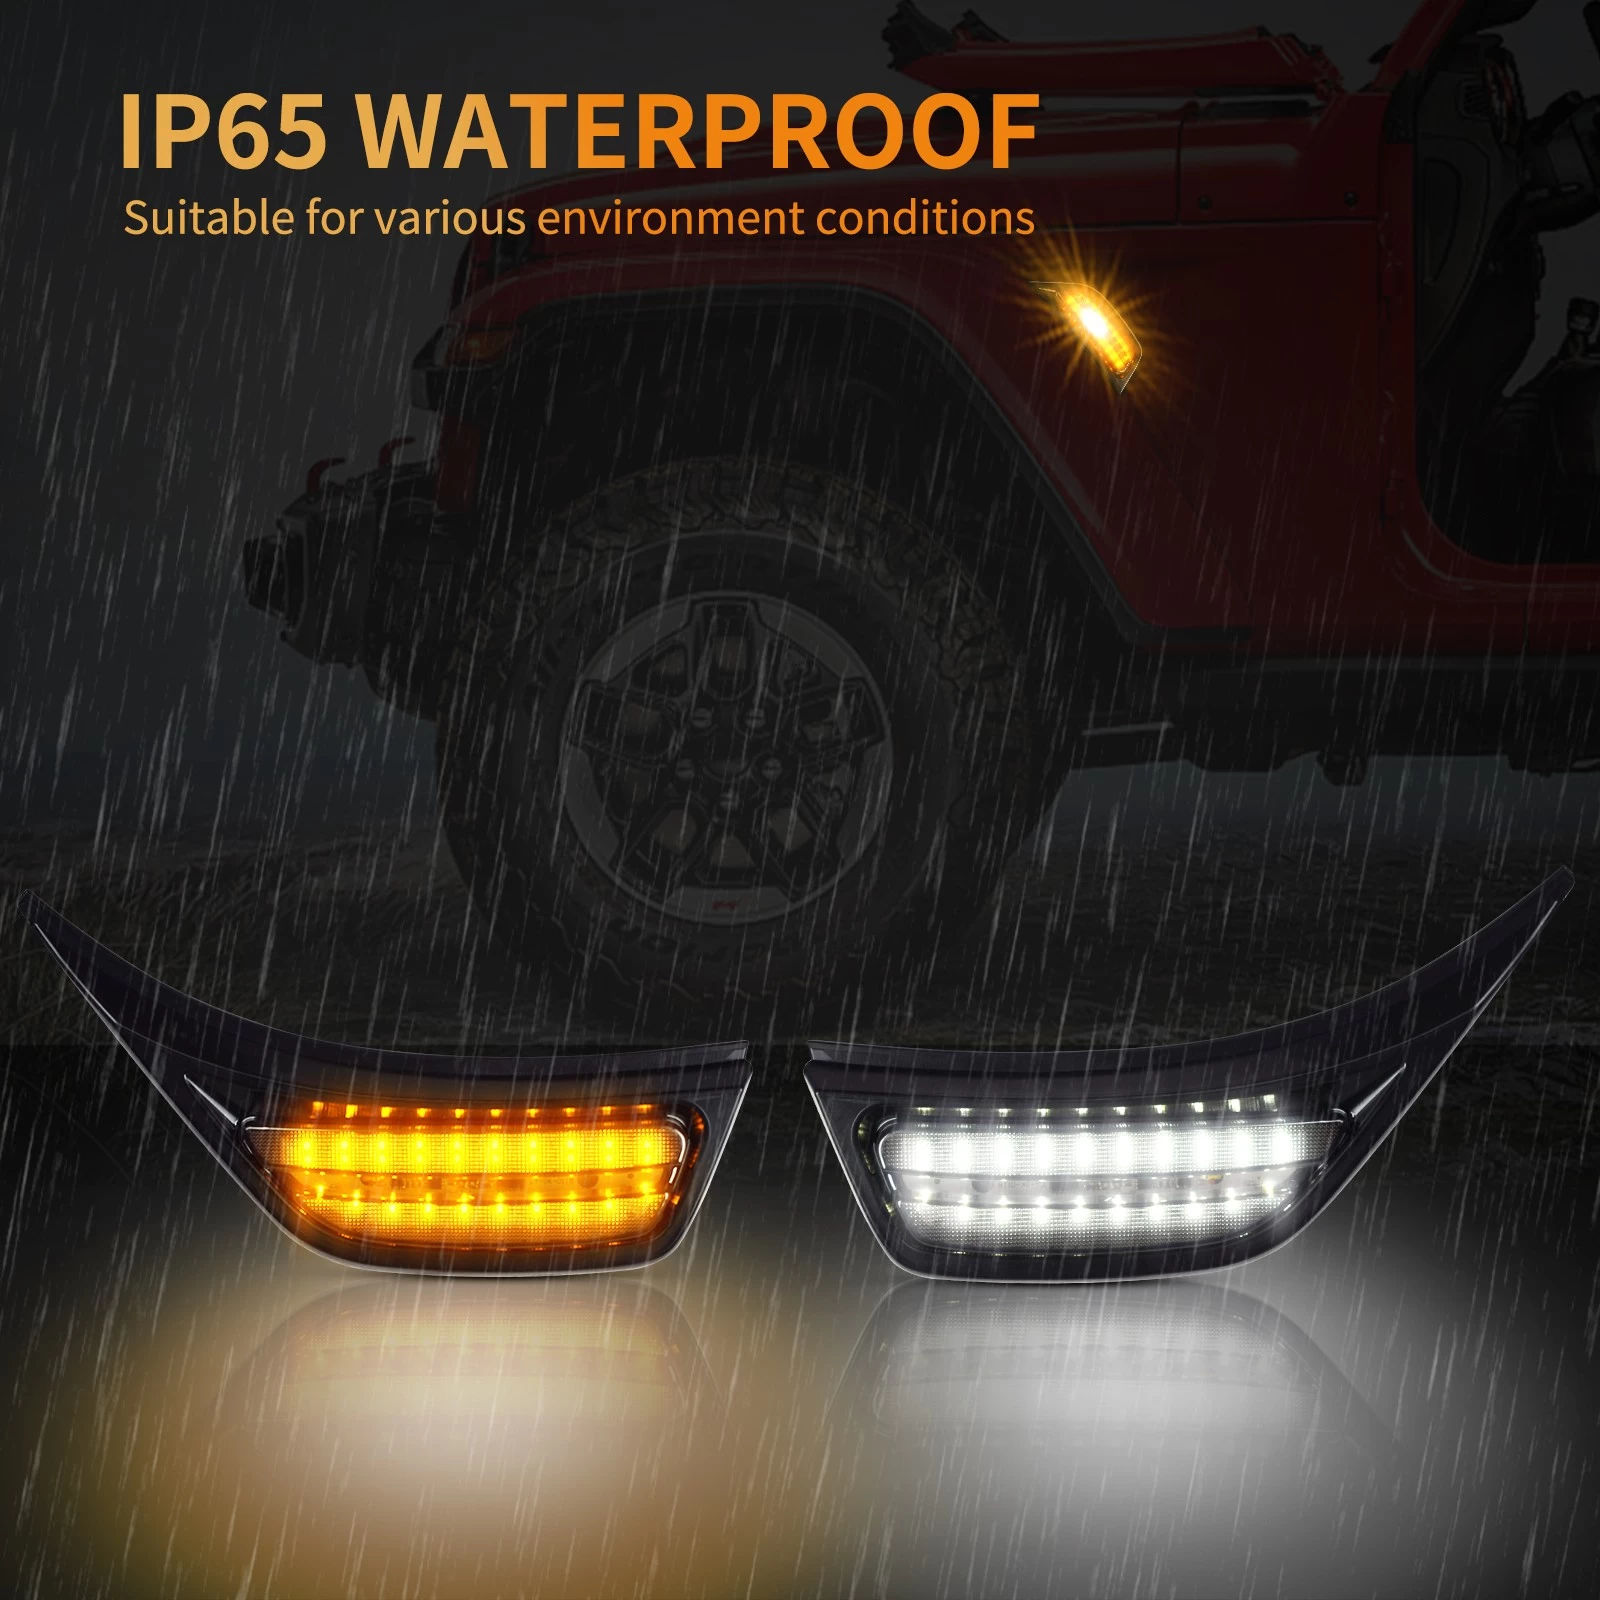 Motorcycle LED Fog Lights Auxiliary Driving Light 120W Dual Color Spotlights White Amber Strobe Flashing Lights for Car Truck 2pcs - COPY - iqmu45